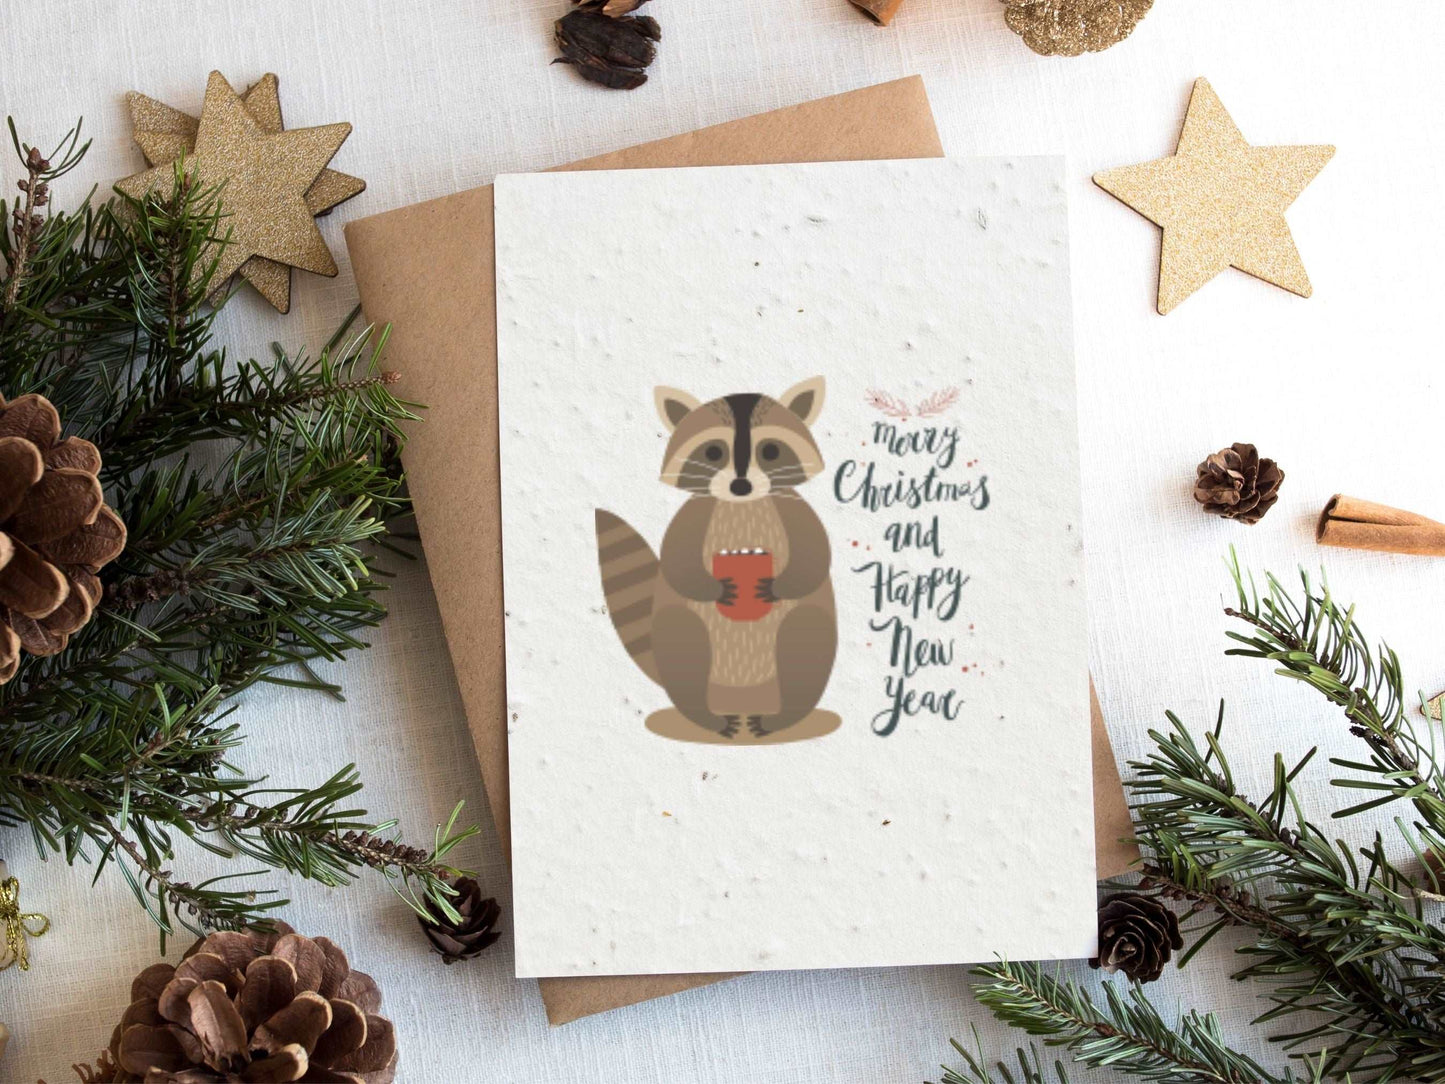 Plantable Seed Paper Christmas Cards 4-Pack - Forest Friends Greeting Card Little Green Paper Shop